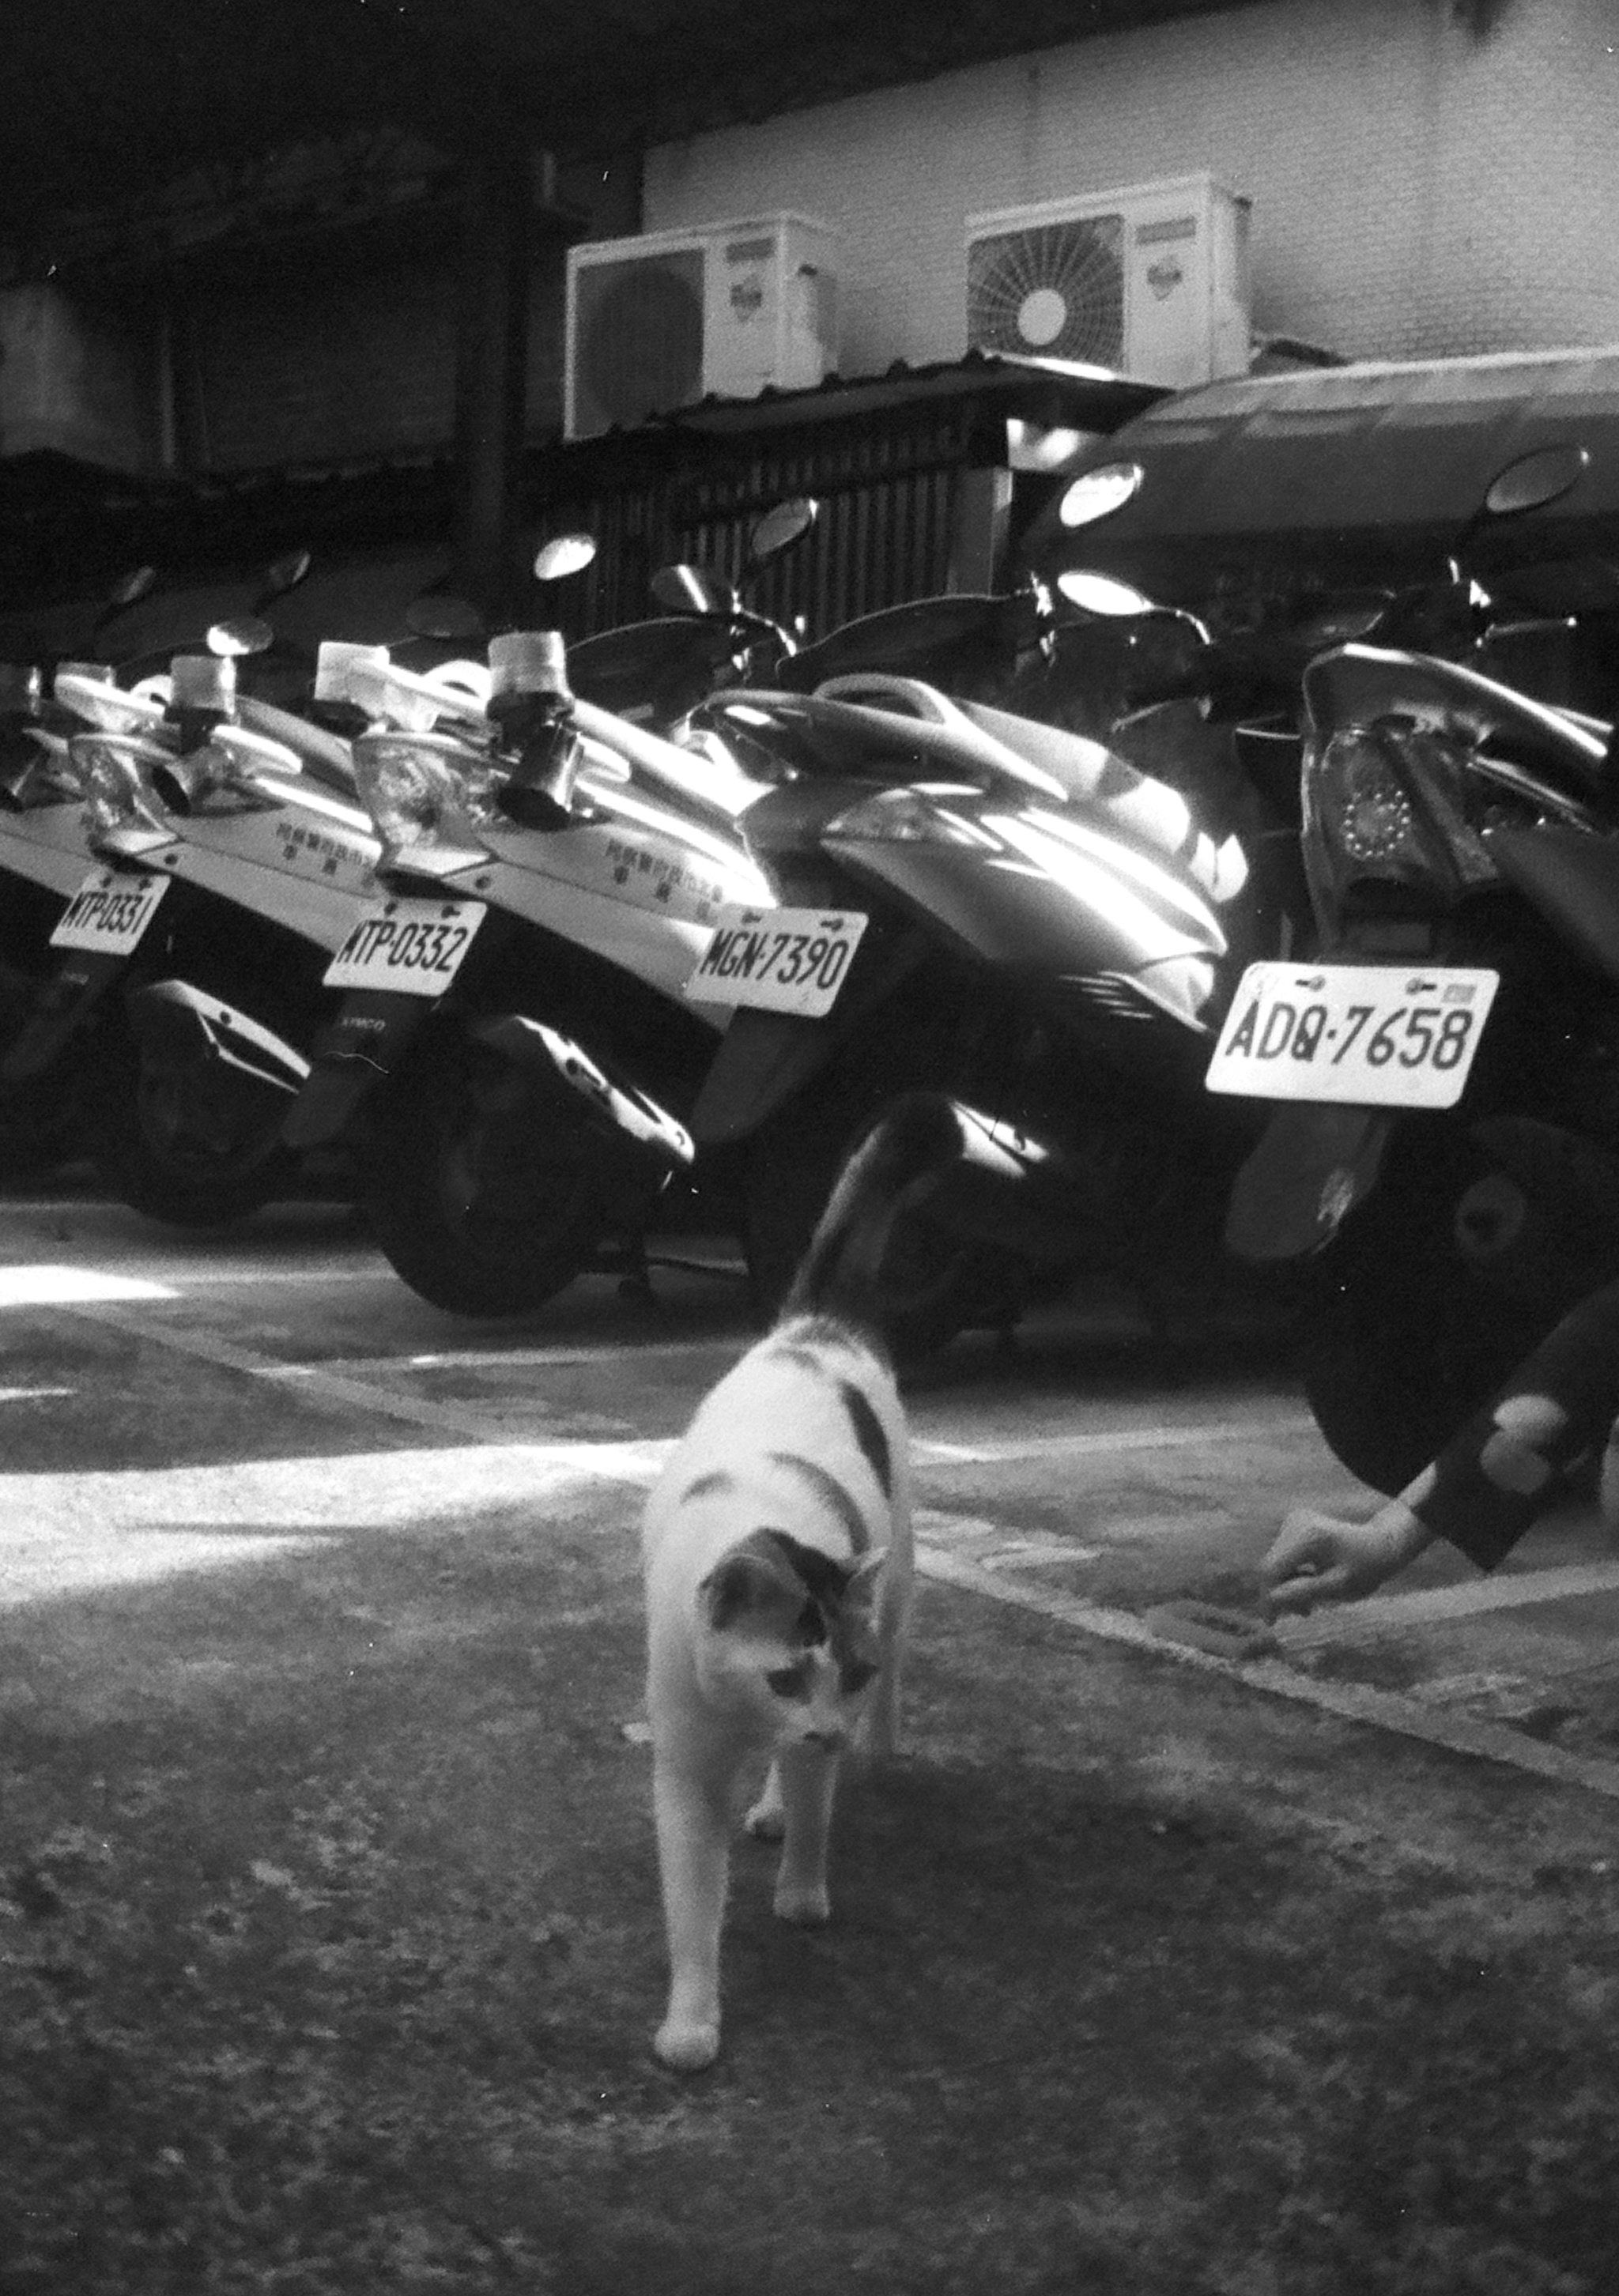 Cat walking in front of a row of scooters.